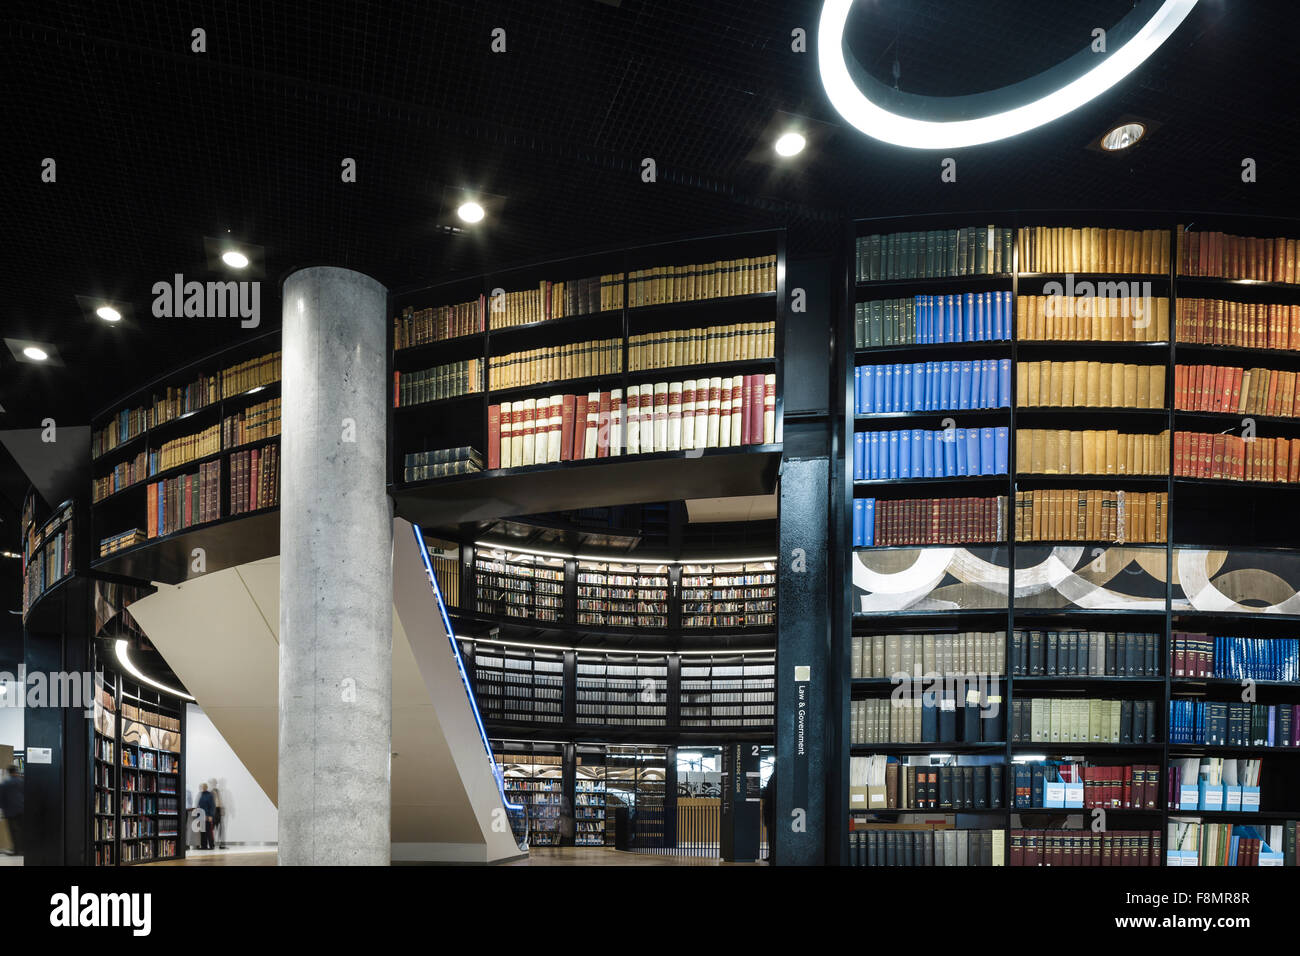 Birmingham Library. Interior view of public library. Curved walls with lined with bookshelves. Contemporary architecture and interior design. Stock Photo